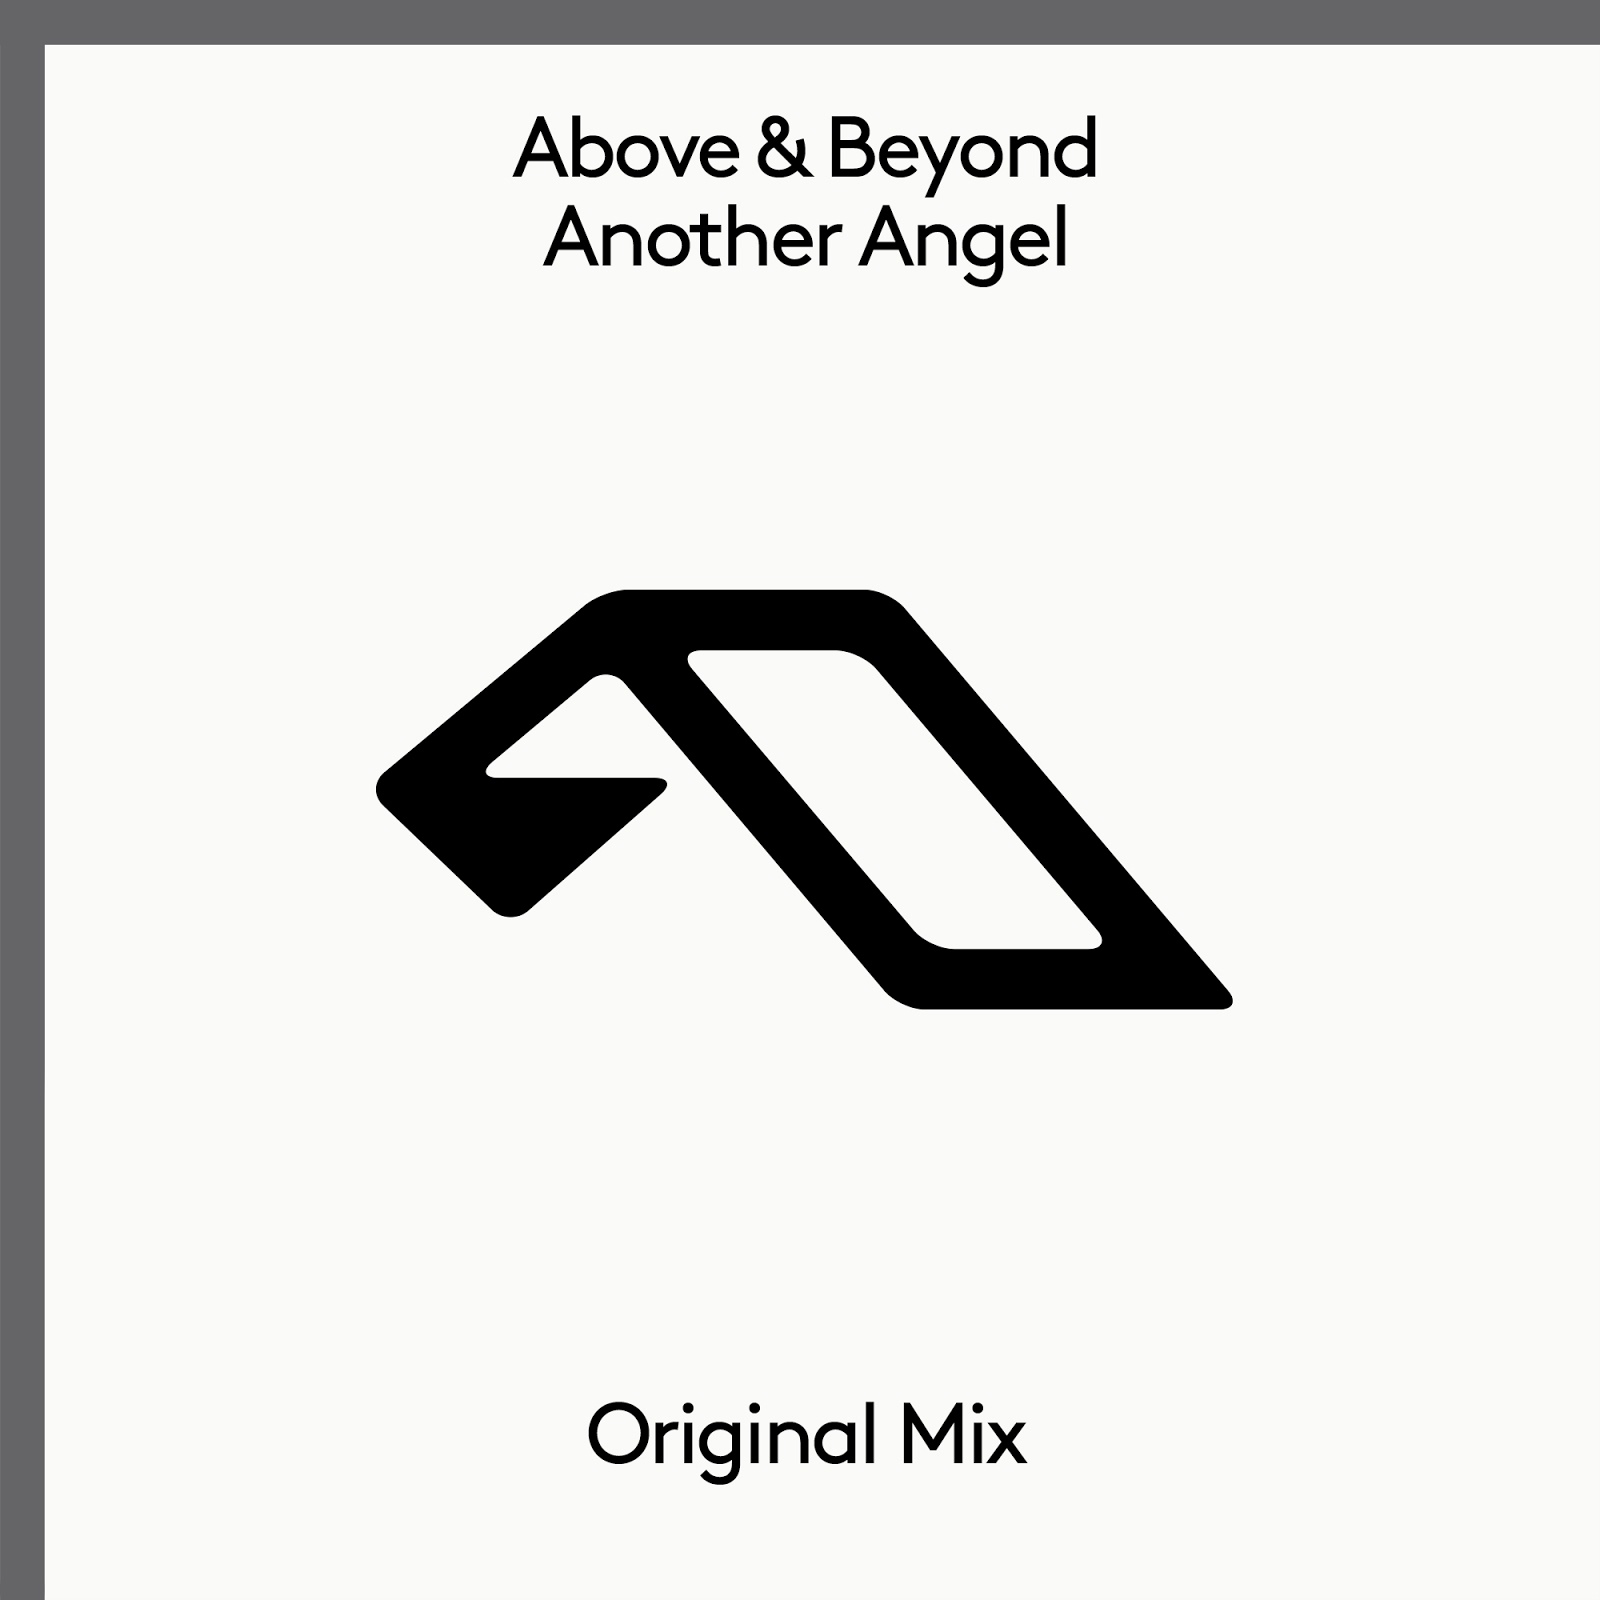 Above & Beyond presents Another Angel on Anjunabeats